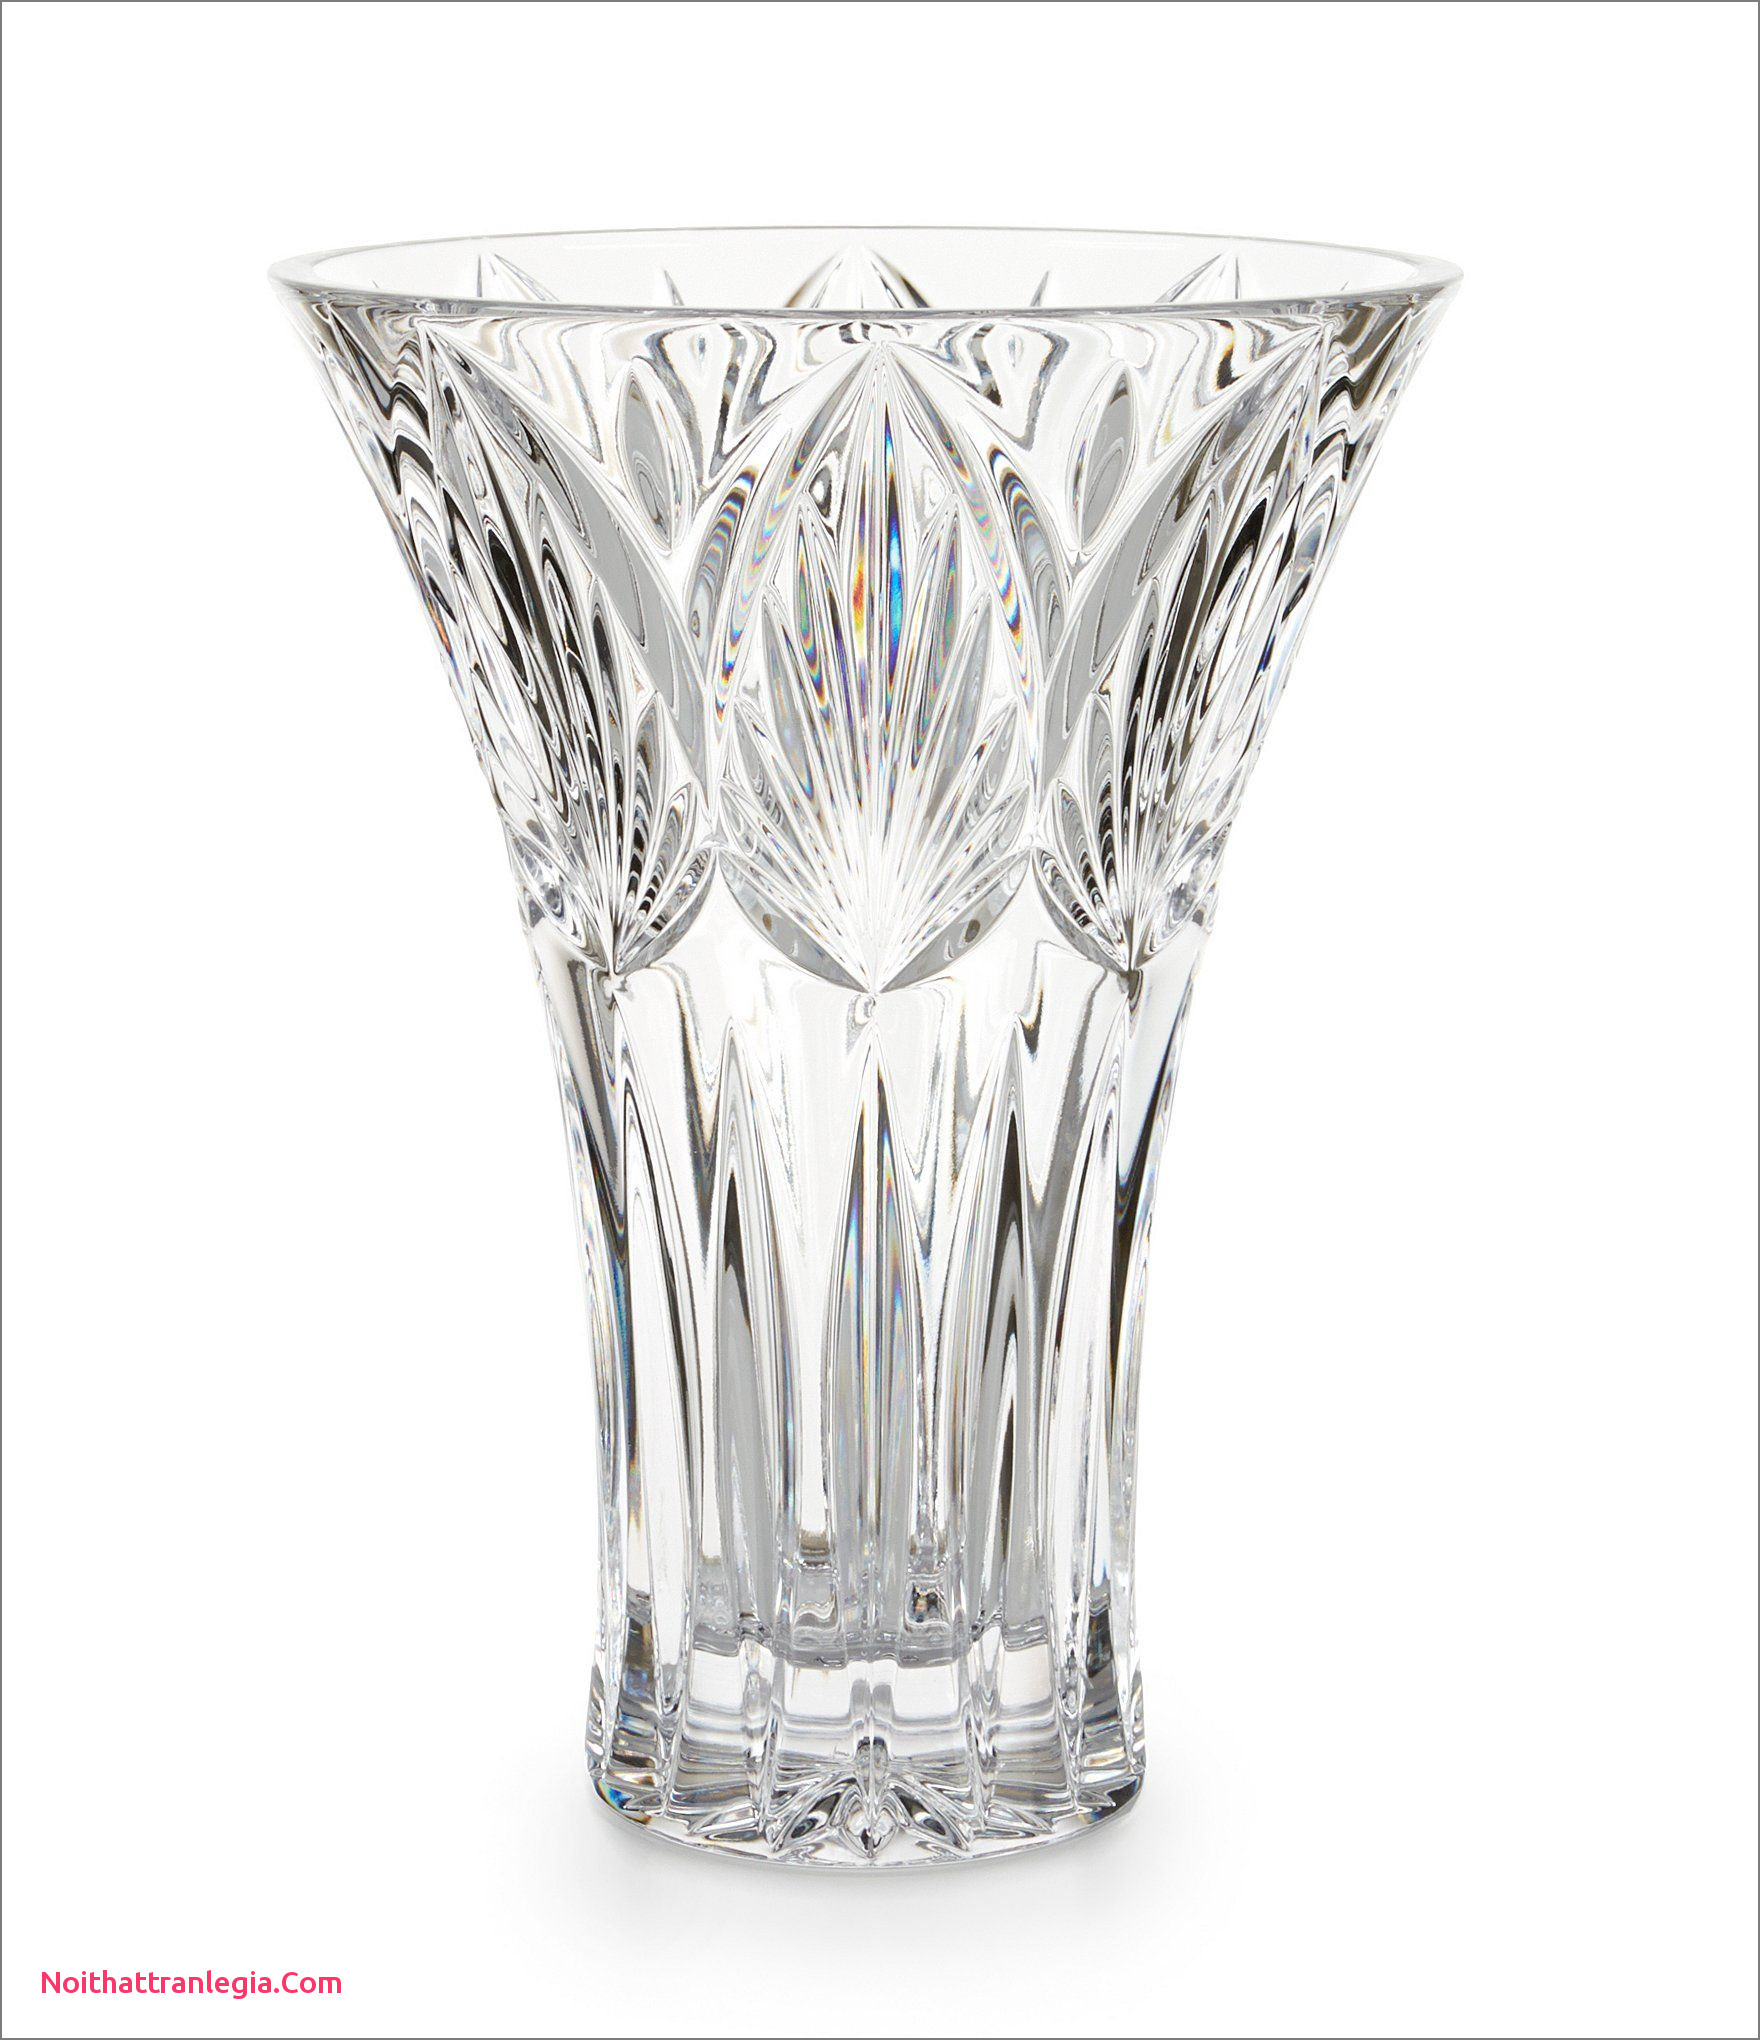 large clear glass vases for the floor of 20 large waterford crystal vase noithattranlegia vases design regarding large waterford crystal vase best of waterford westbridge crystal vase of large waterford crystal vase